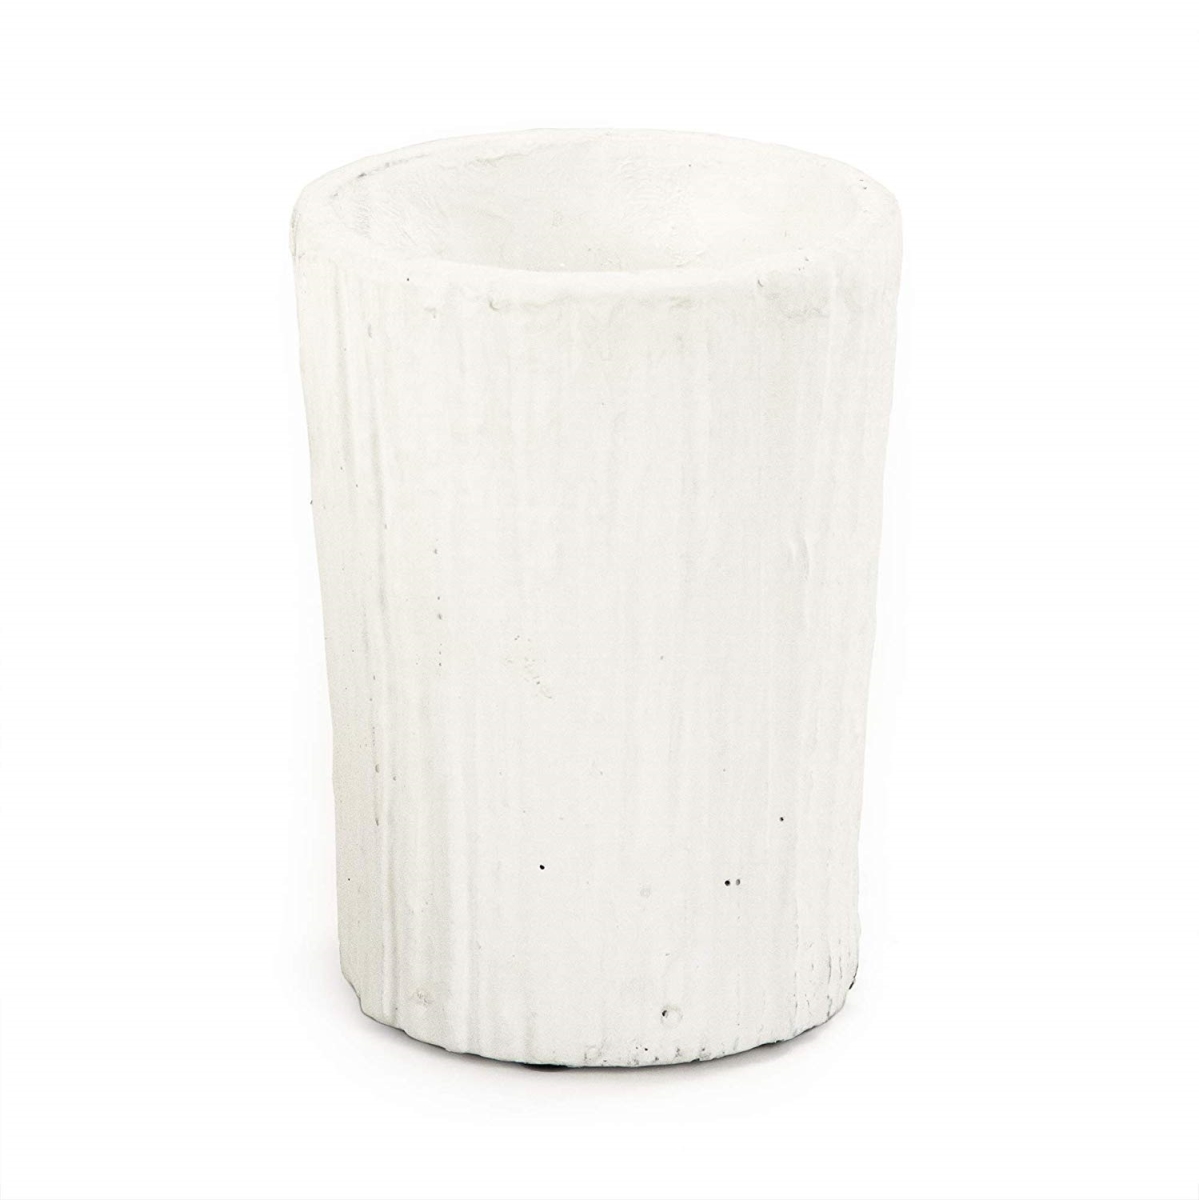 10043s A148 Distressed Vase, Small - White